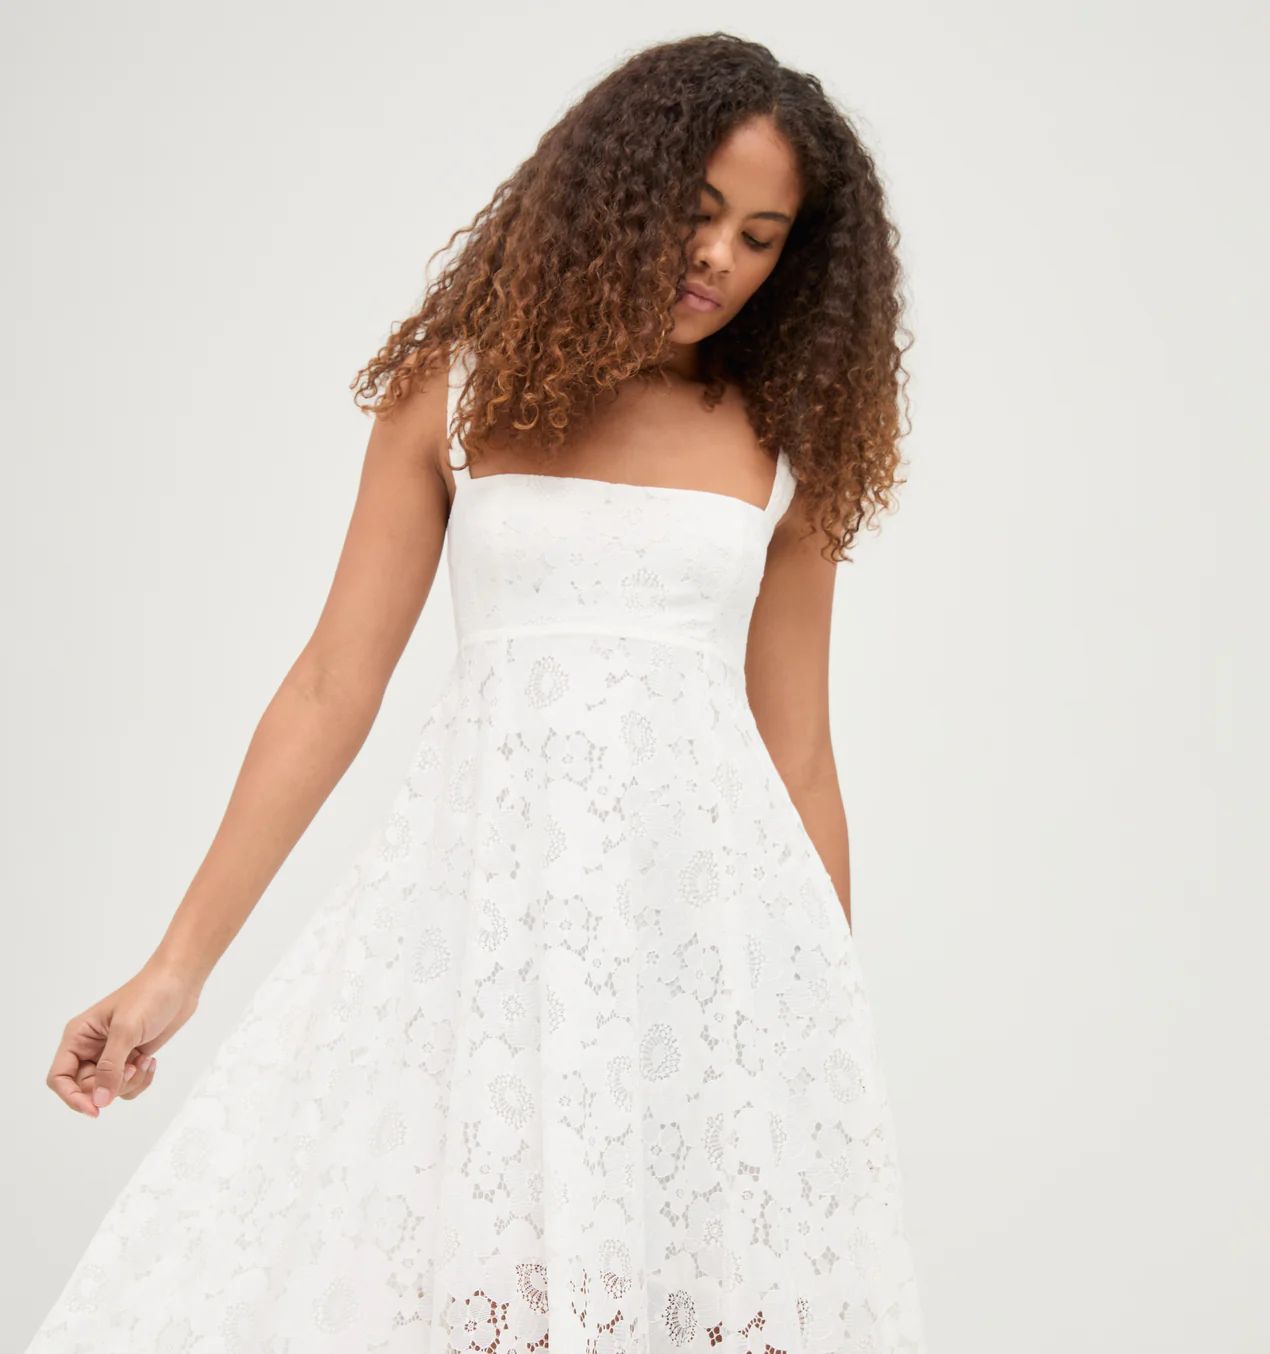 The Lace Rowena Dress - White Floral Lace | Hill House Home